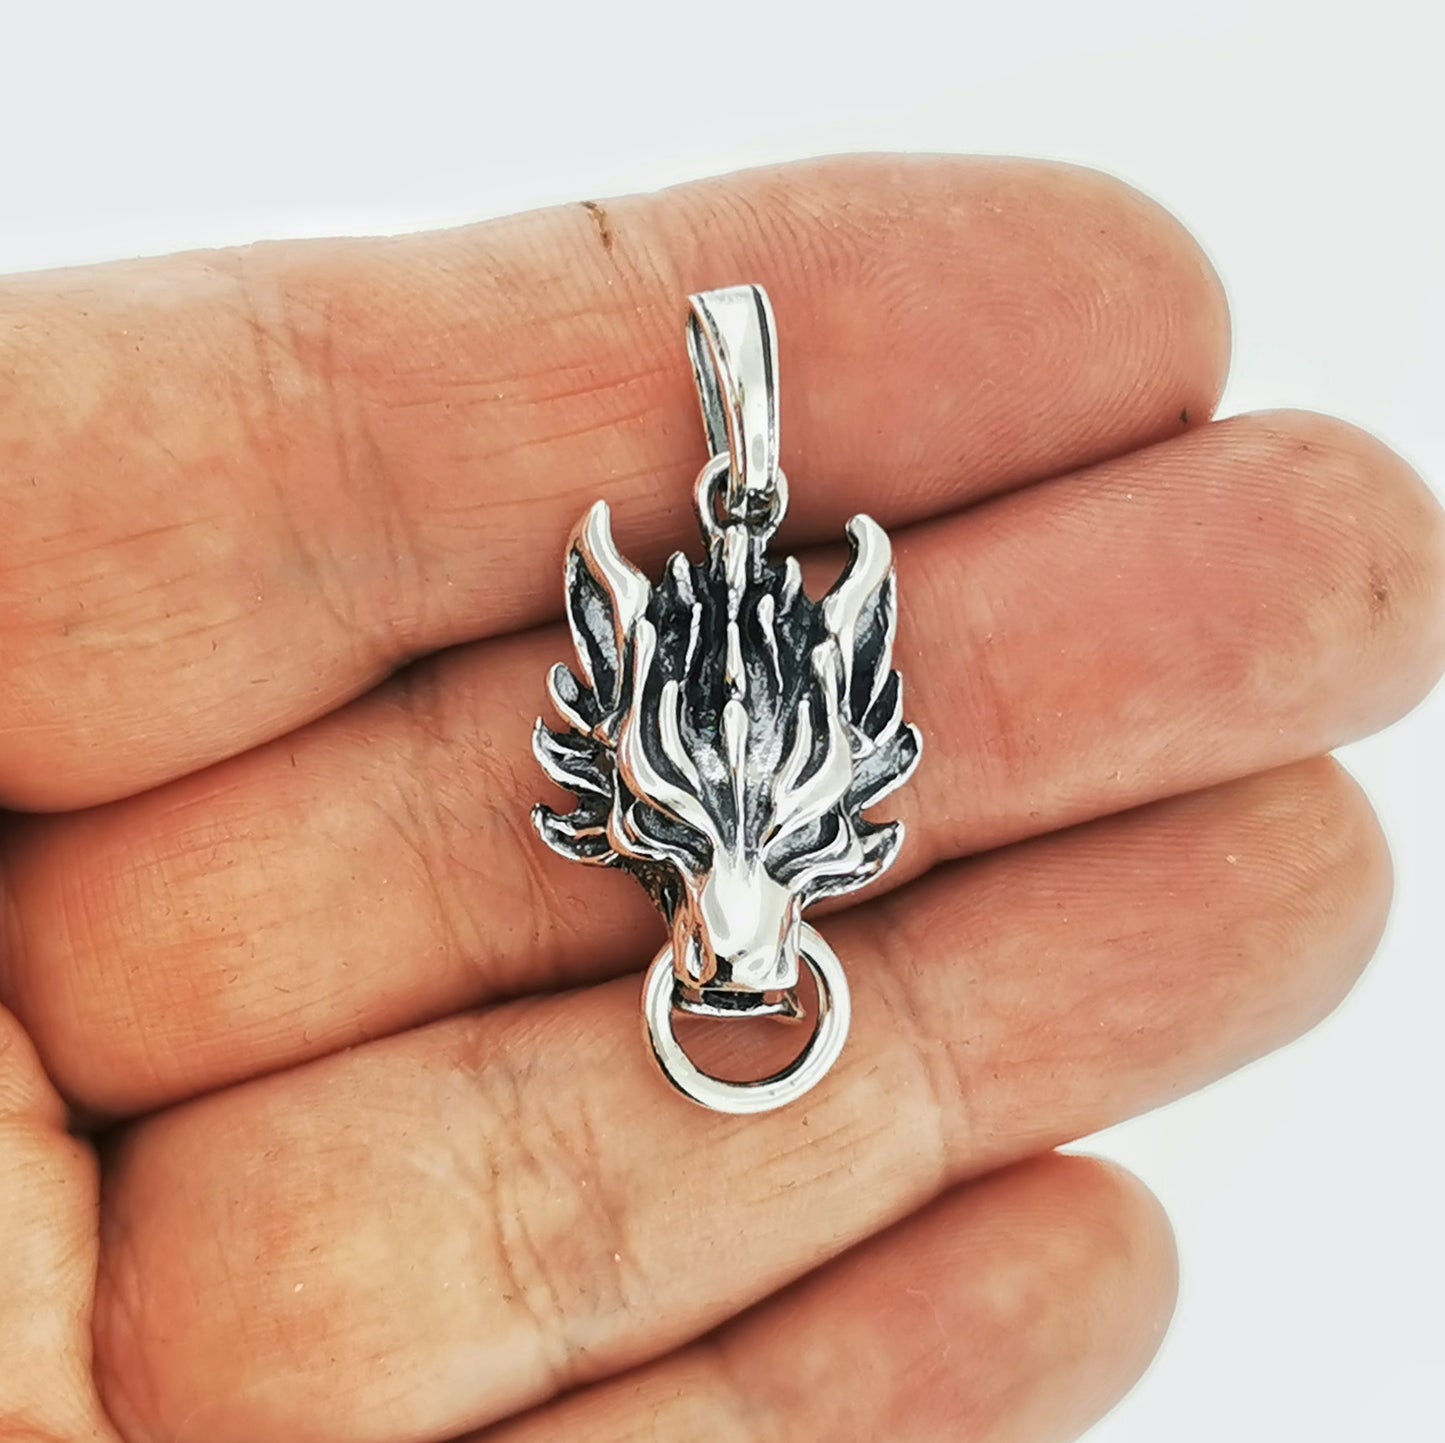 Final Fantasy 7 Wolf Pendant in Sterling Silver or Antique Bronze, FF7 Fenrir Wolf Pendant, FF7 Cloud Strife Wolf Pendant, Final Fantasy 7 Advent Children Wolf Pendant, Final Fantasy vii Cloud, Final Fantasy jewelry, Final Fantasy Pendant